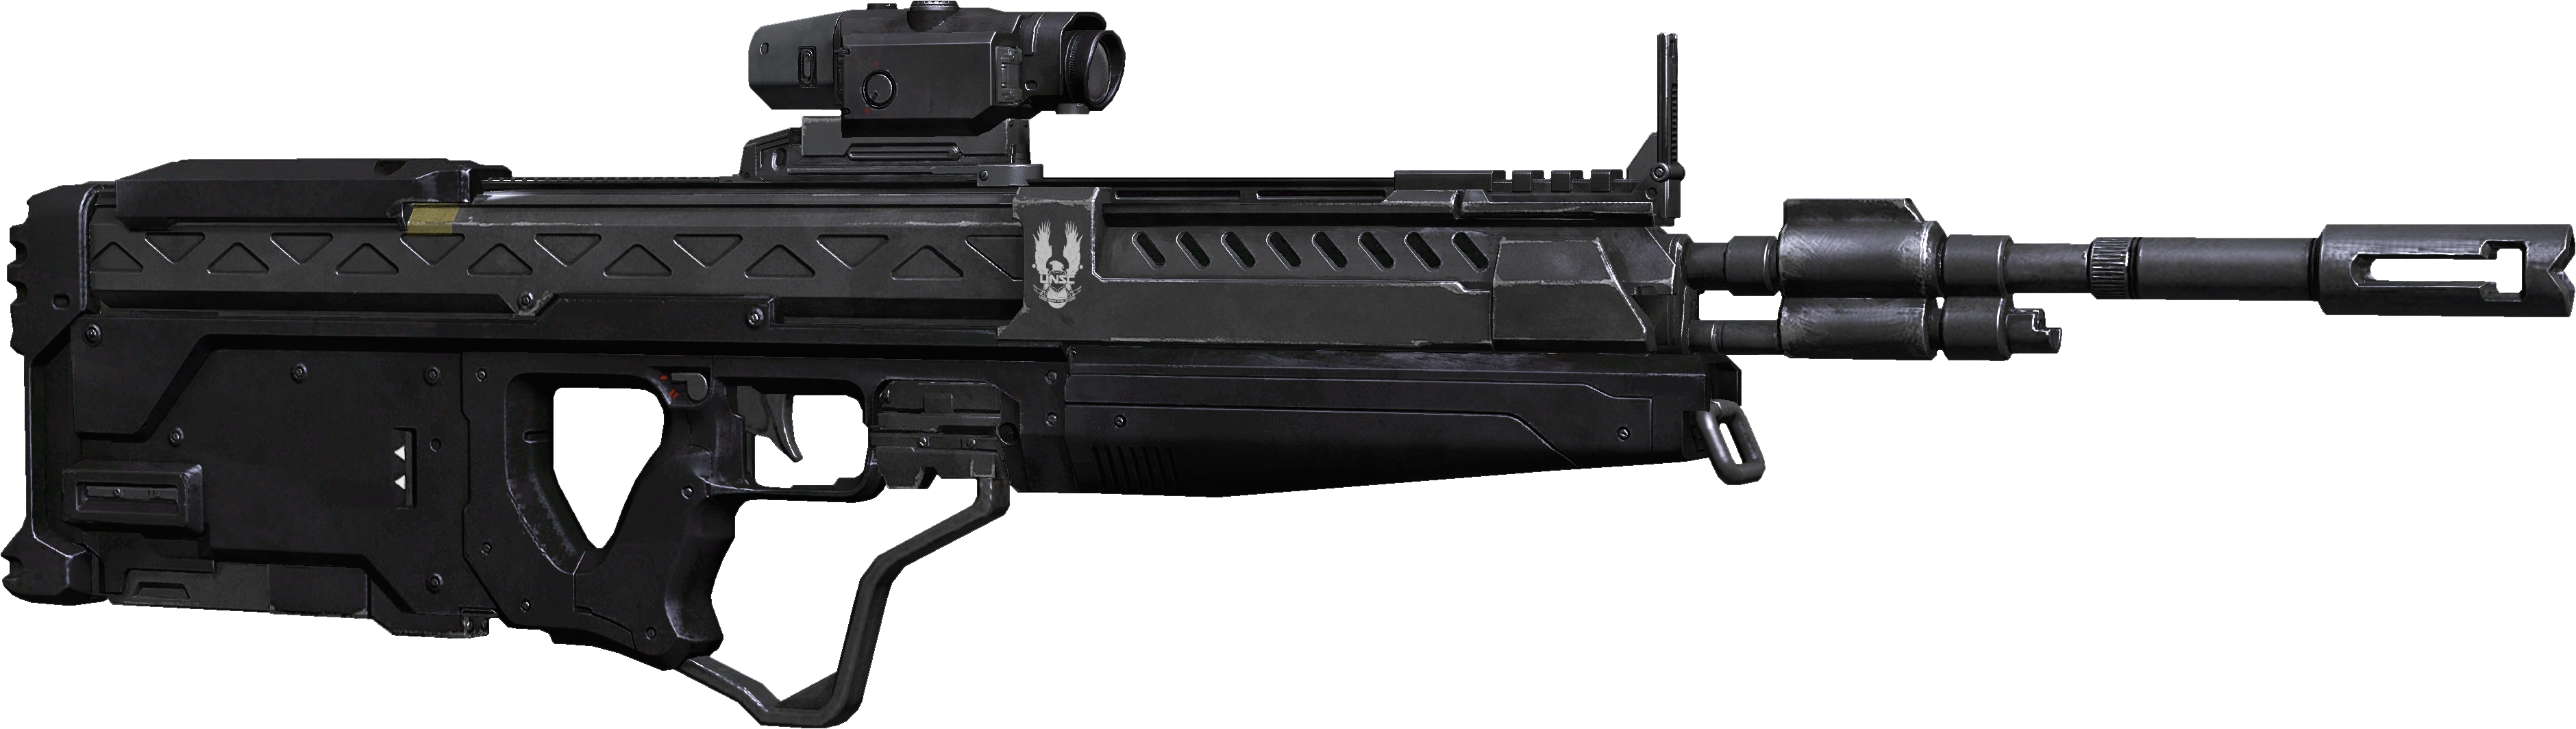 M395 Designated Marksman Rifle - Halo Unsc Weapons (3760x1064), Png Download